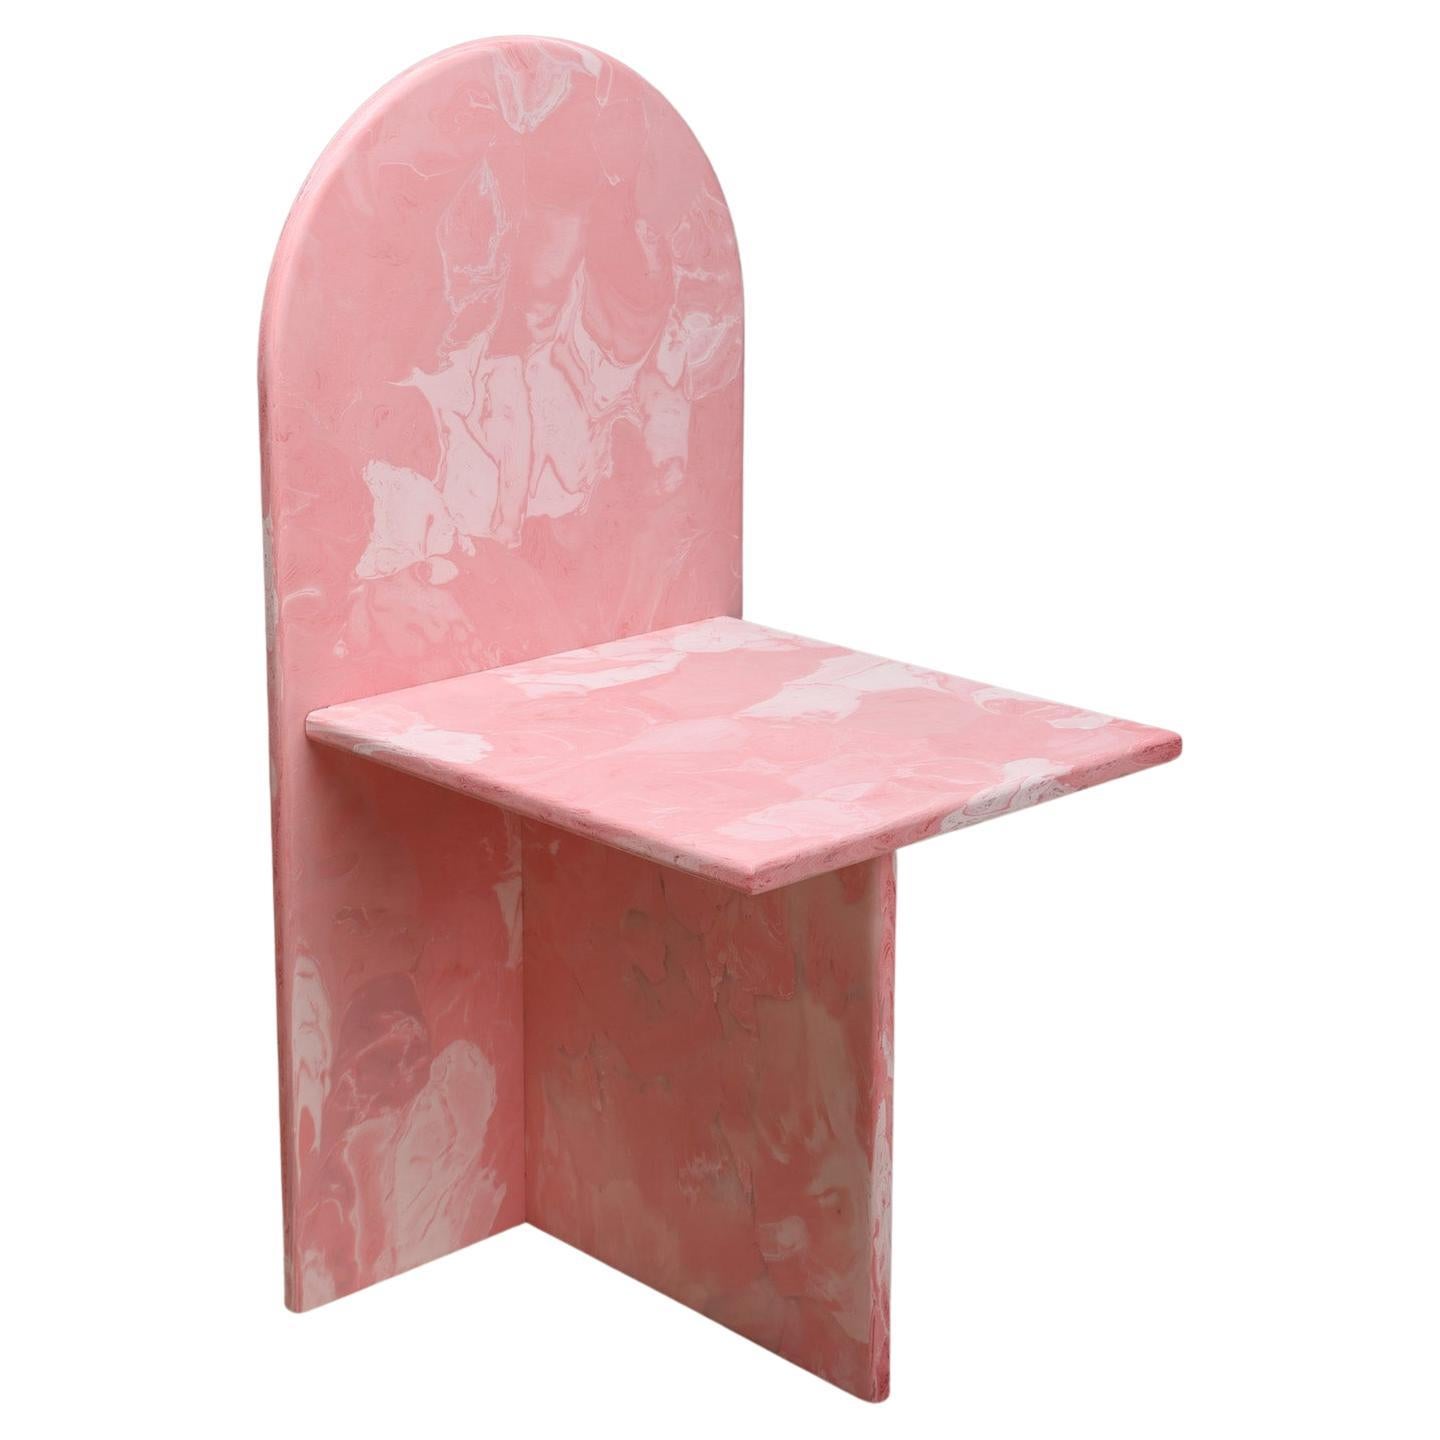 Contemporary Pink Chair Hand-Crafted from 100% Recycled Plastic by Anqa Studios For Sale